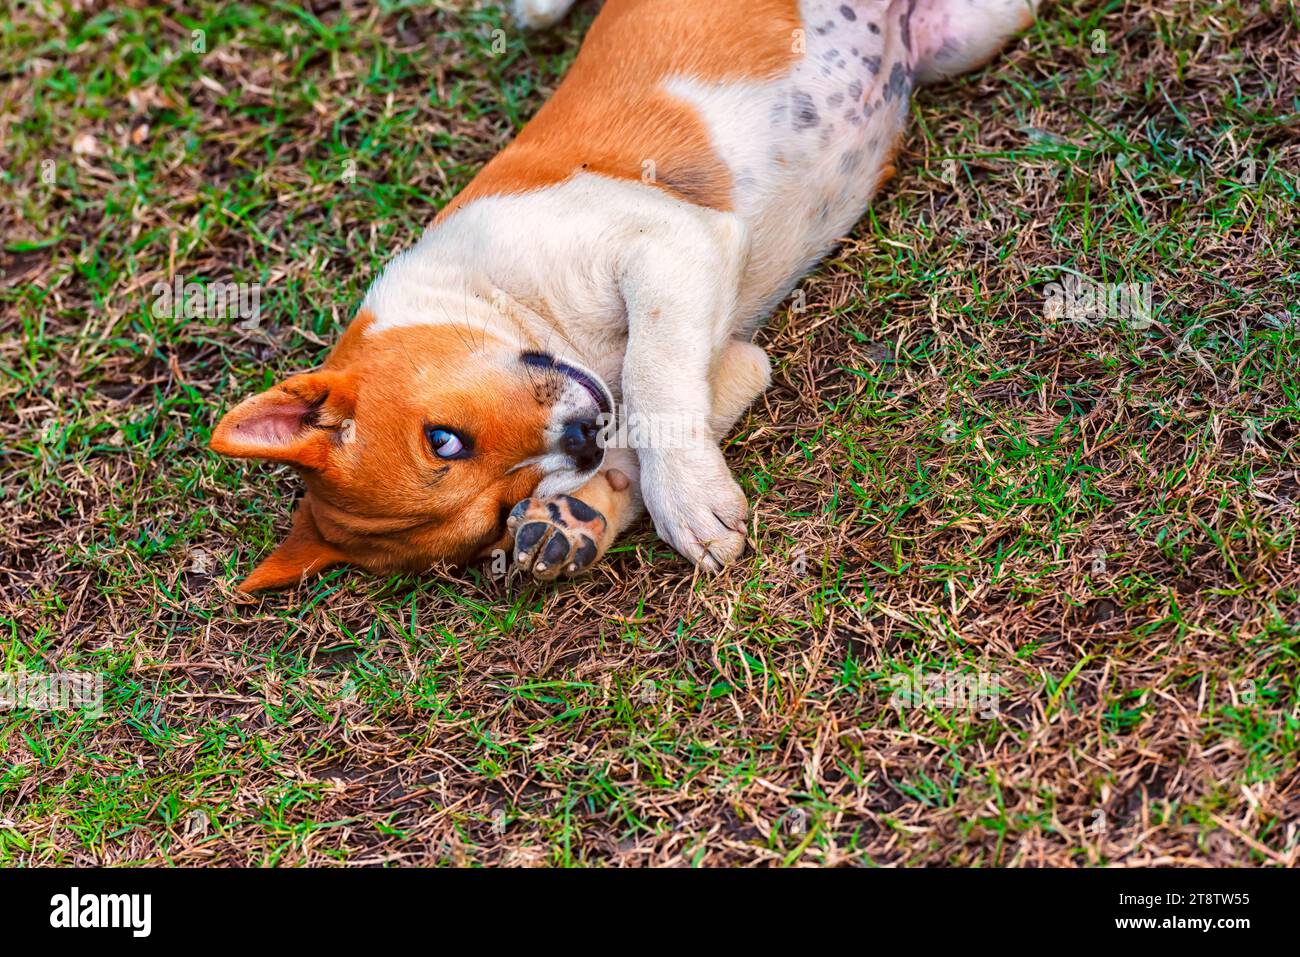 An Indian street dog lying on the ground and looking at the camera. Stock Photo